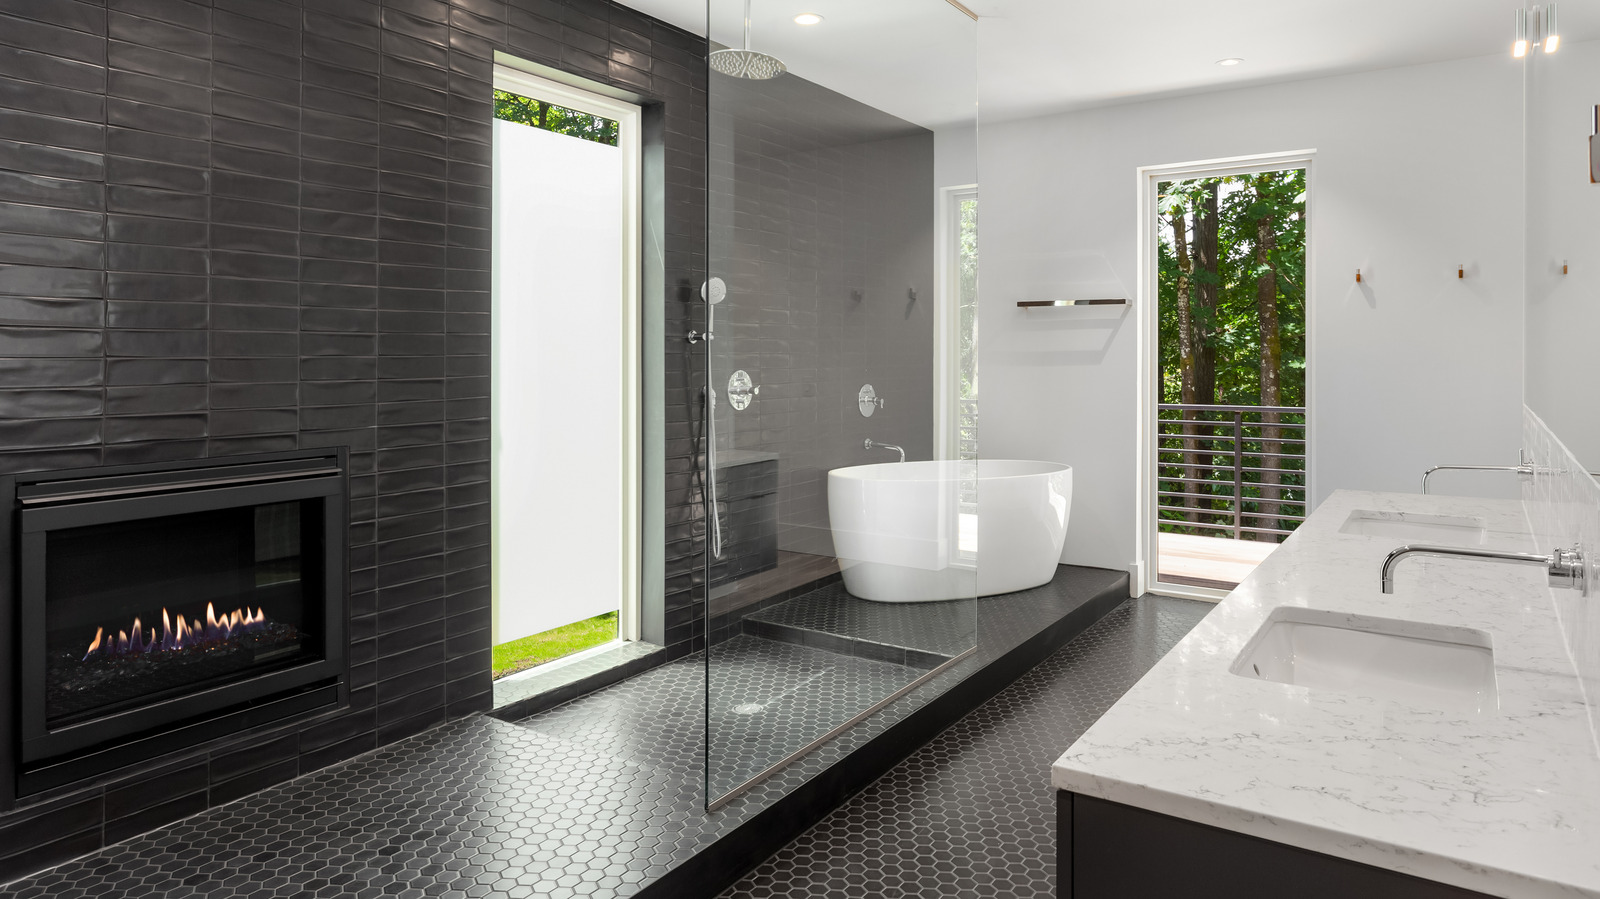 https://www.housedigest.com/img/gallery/25-stunning-black-bathrooms-youll-be-completely-obsessed-with/l-intro-1630669748.jpg